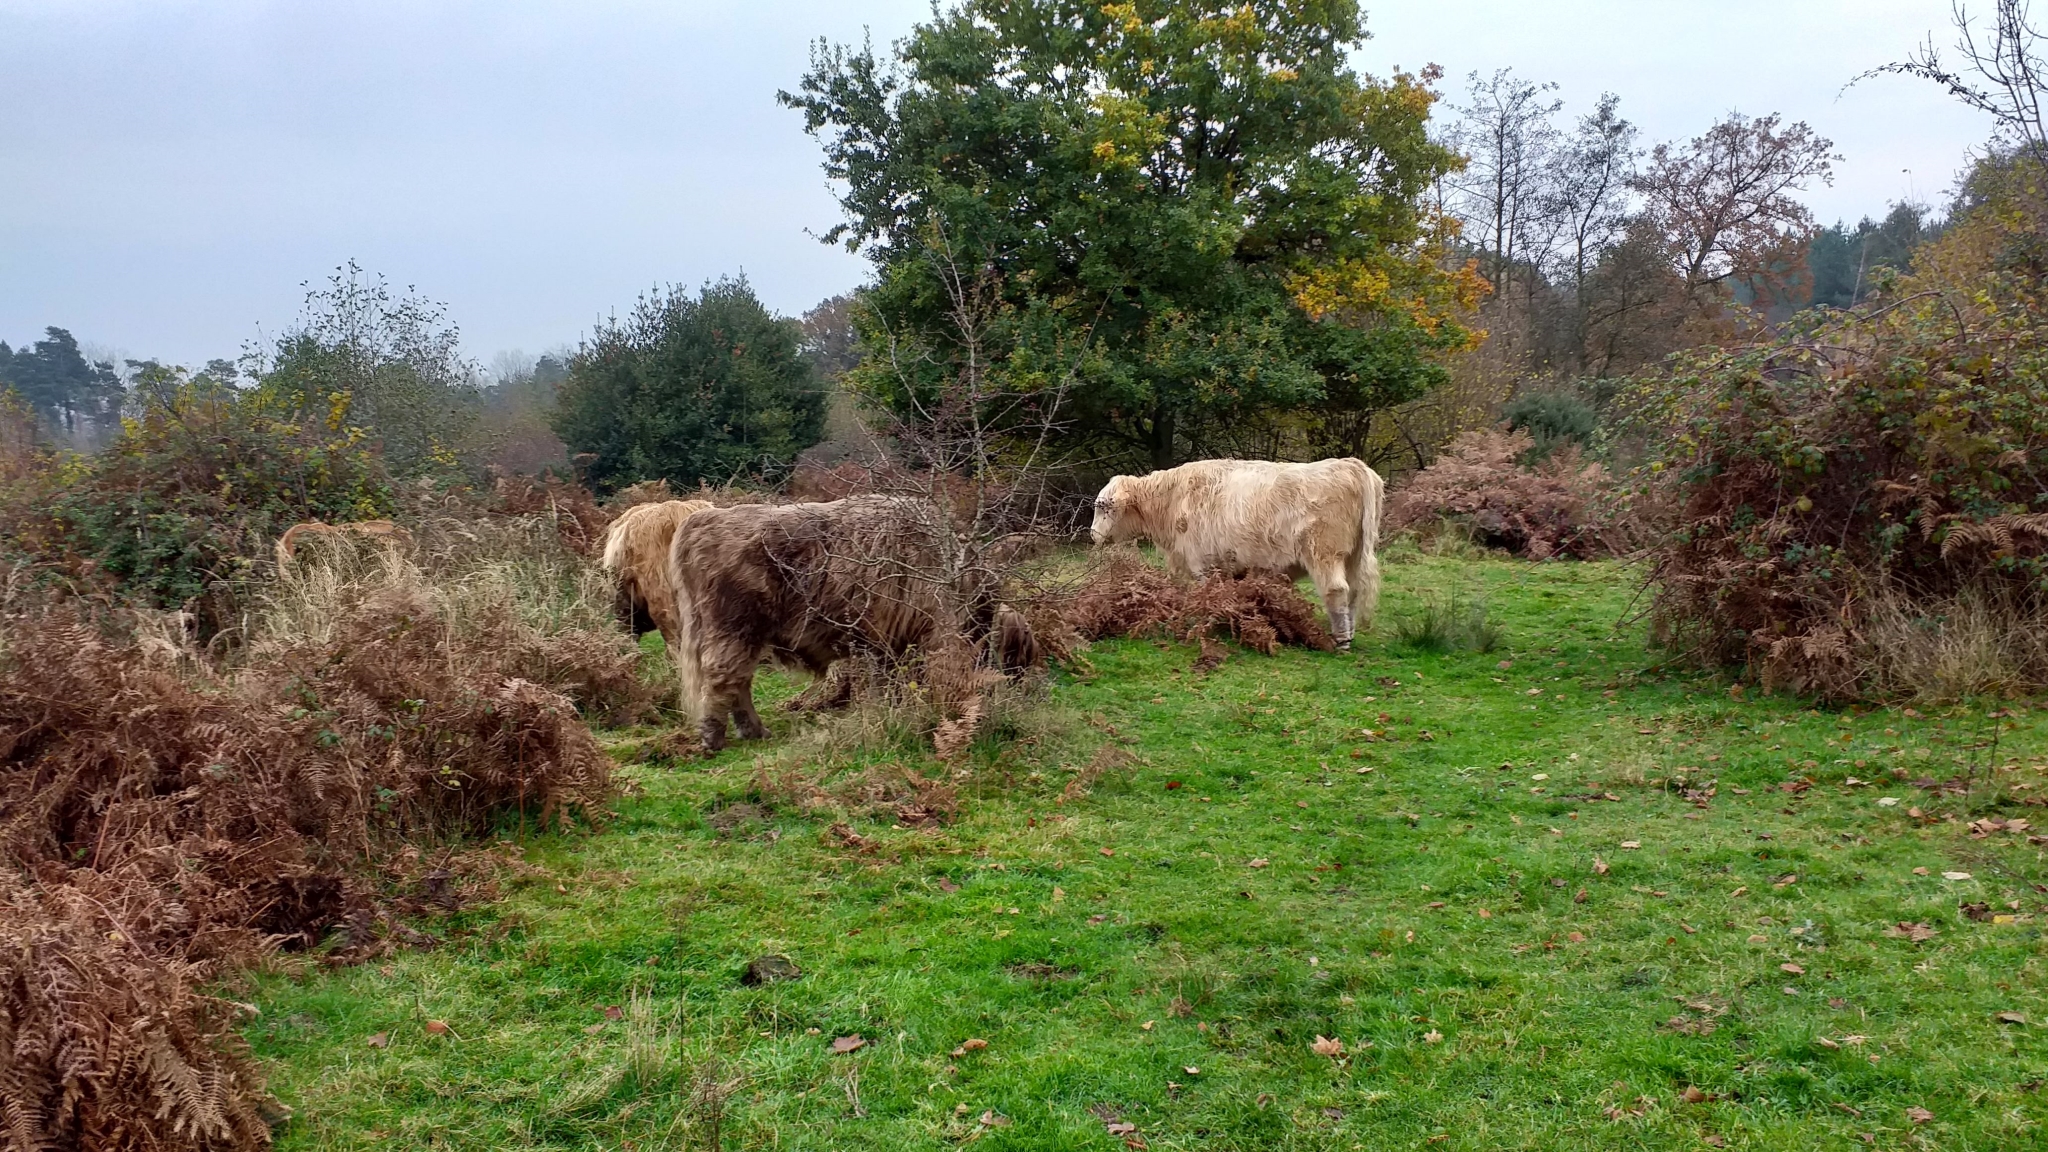 A photo from the FoTF Conservation Event - November 2019 - Gorse Clearance at Hockham Hills & Holes : Cows!